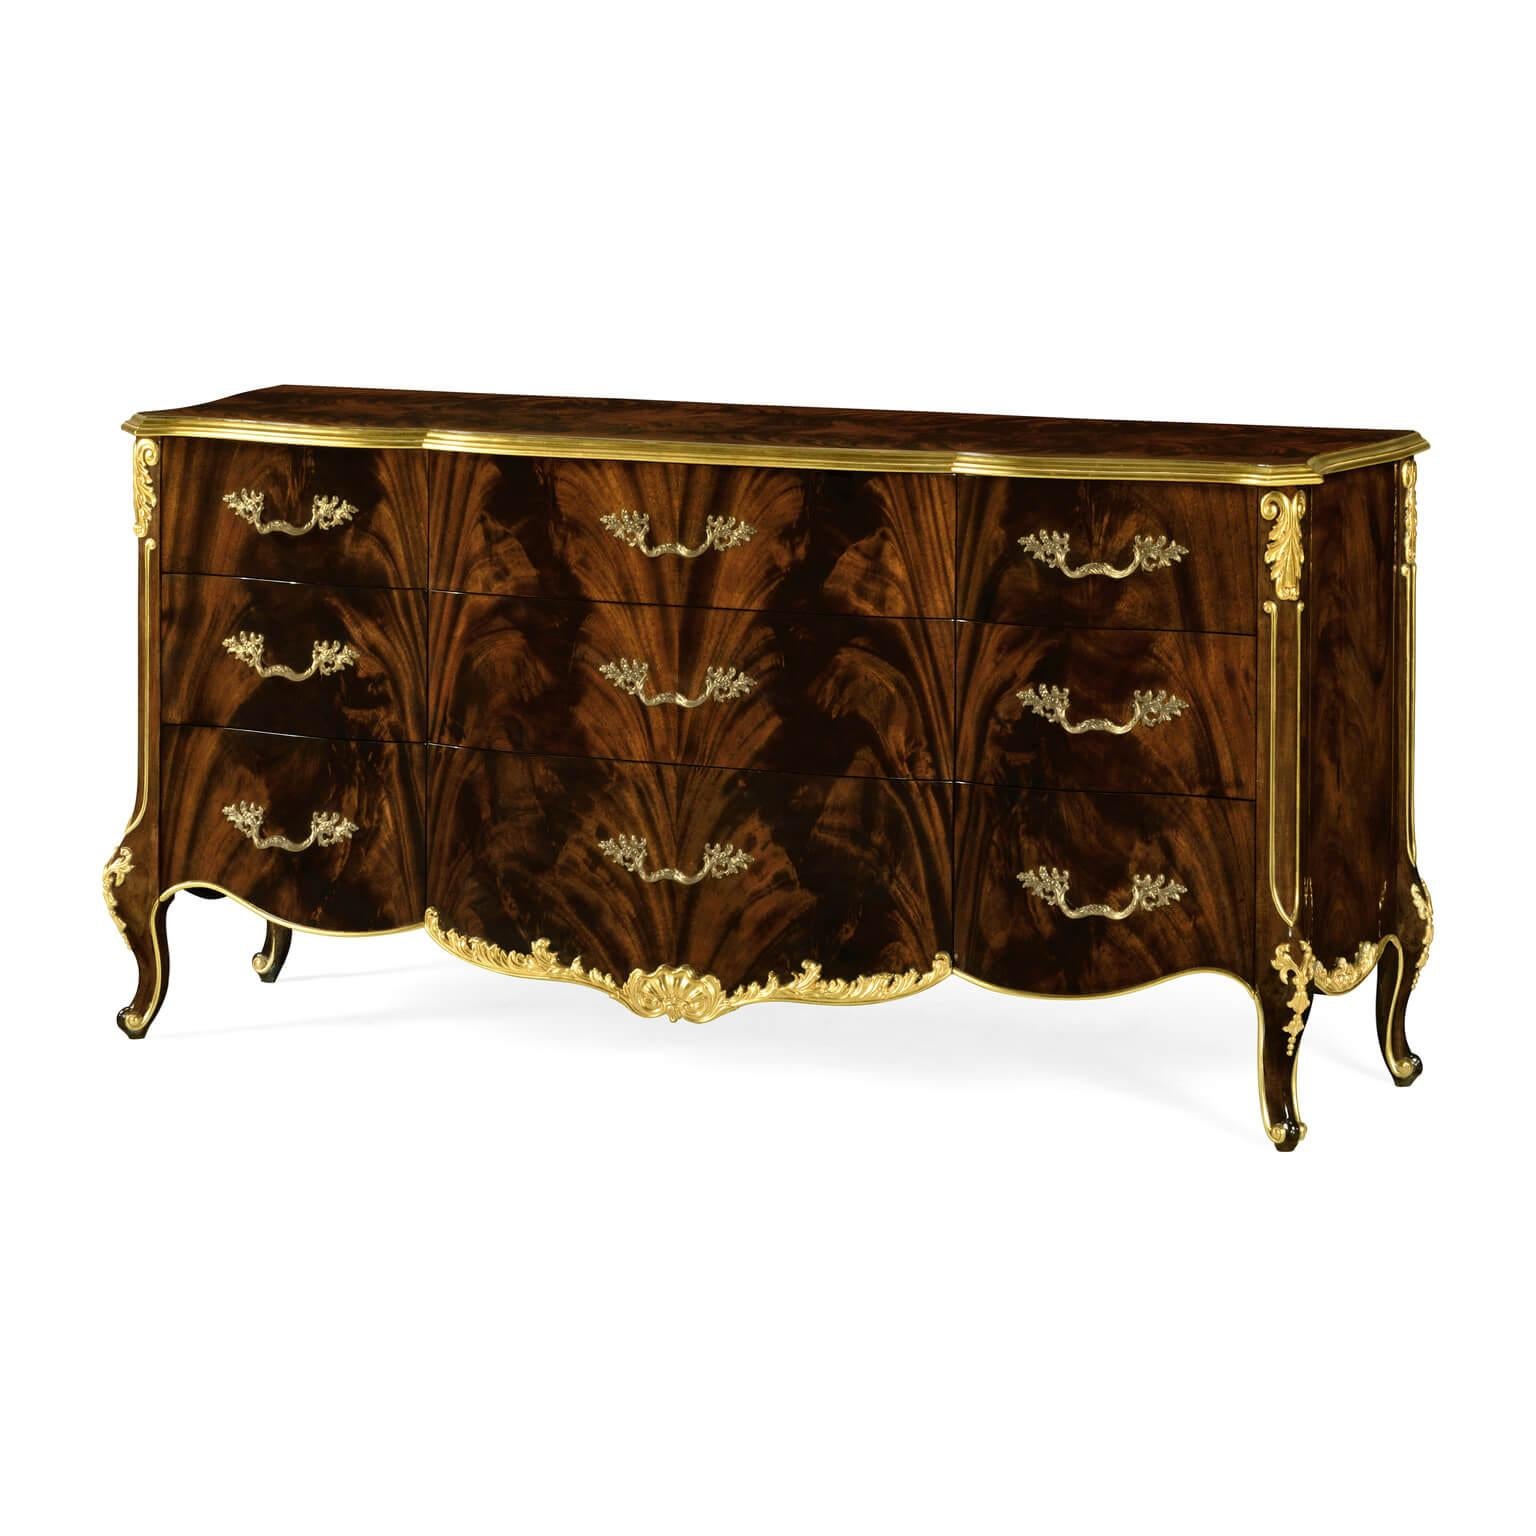 A large Rococo style mahogany and gilt carved nine-drawer dresser with serpentine shape and bronze handles.

Dimensions: 72